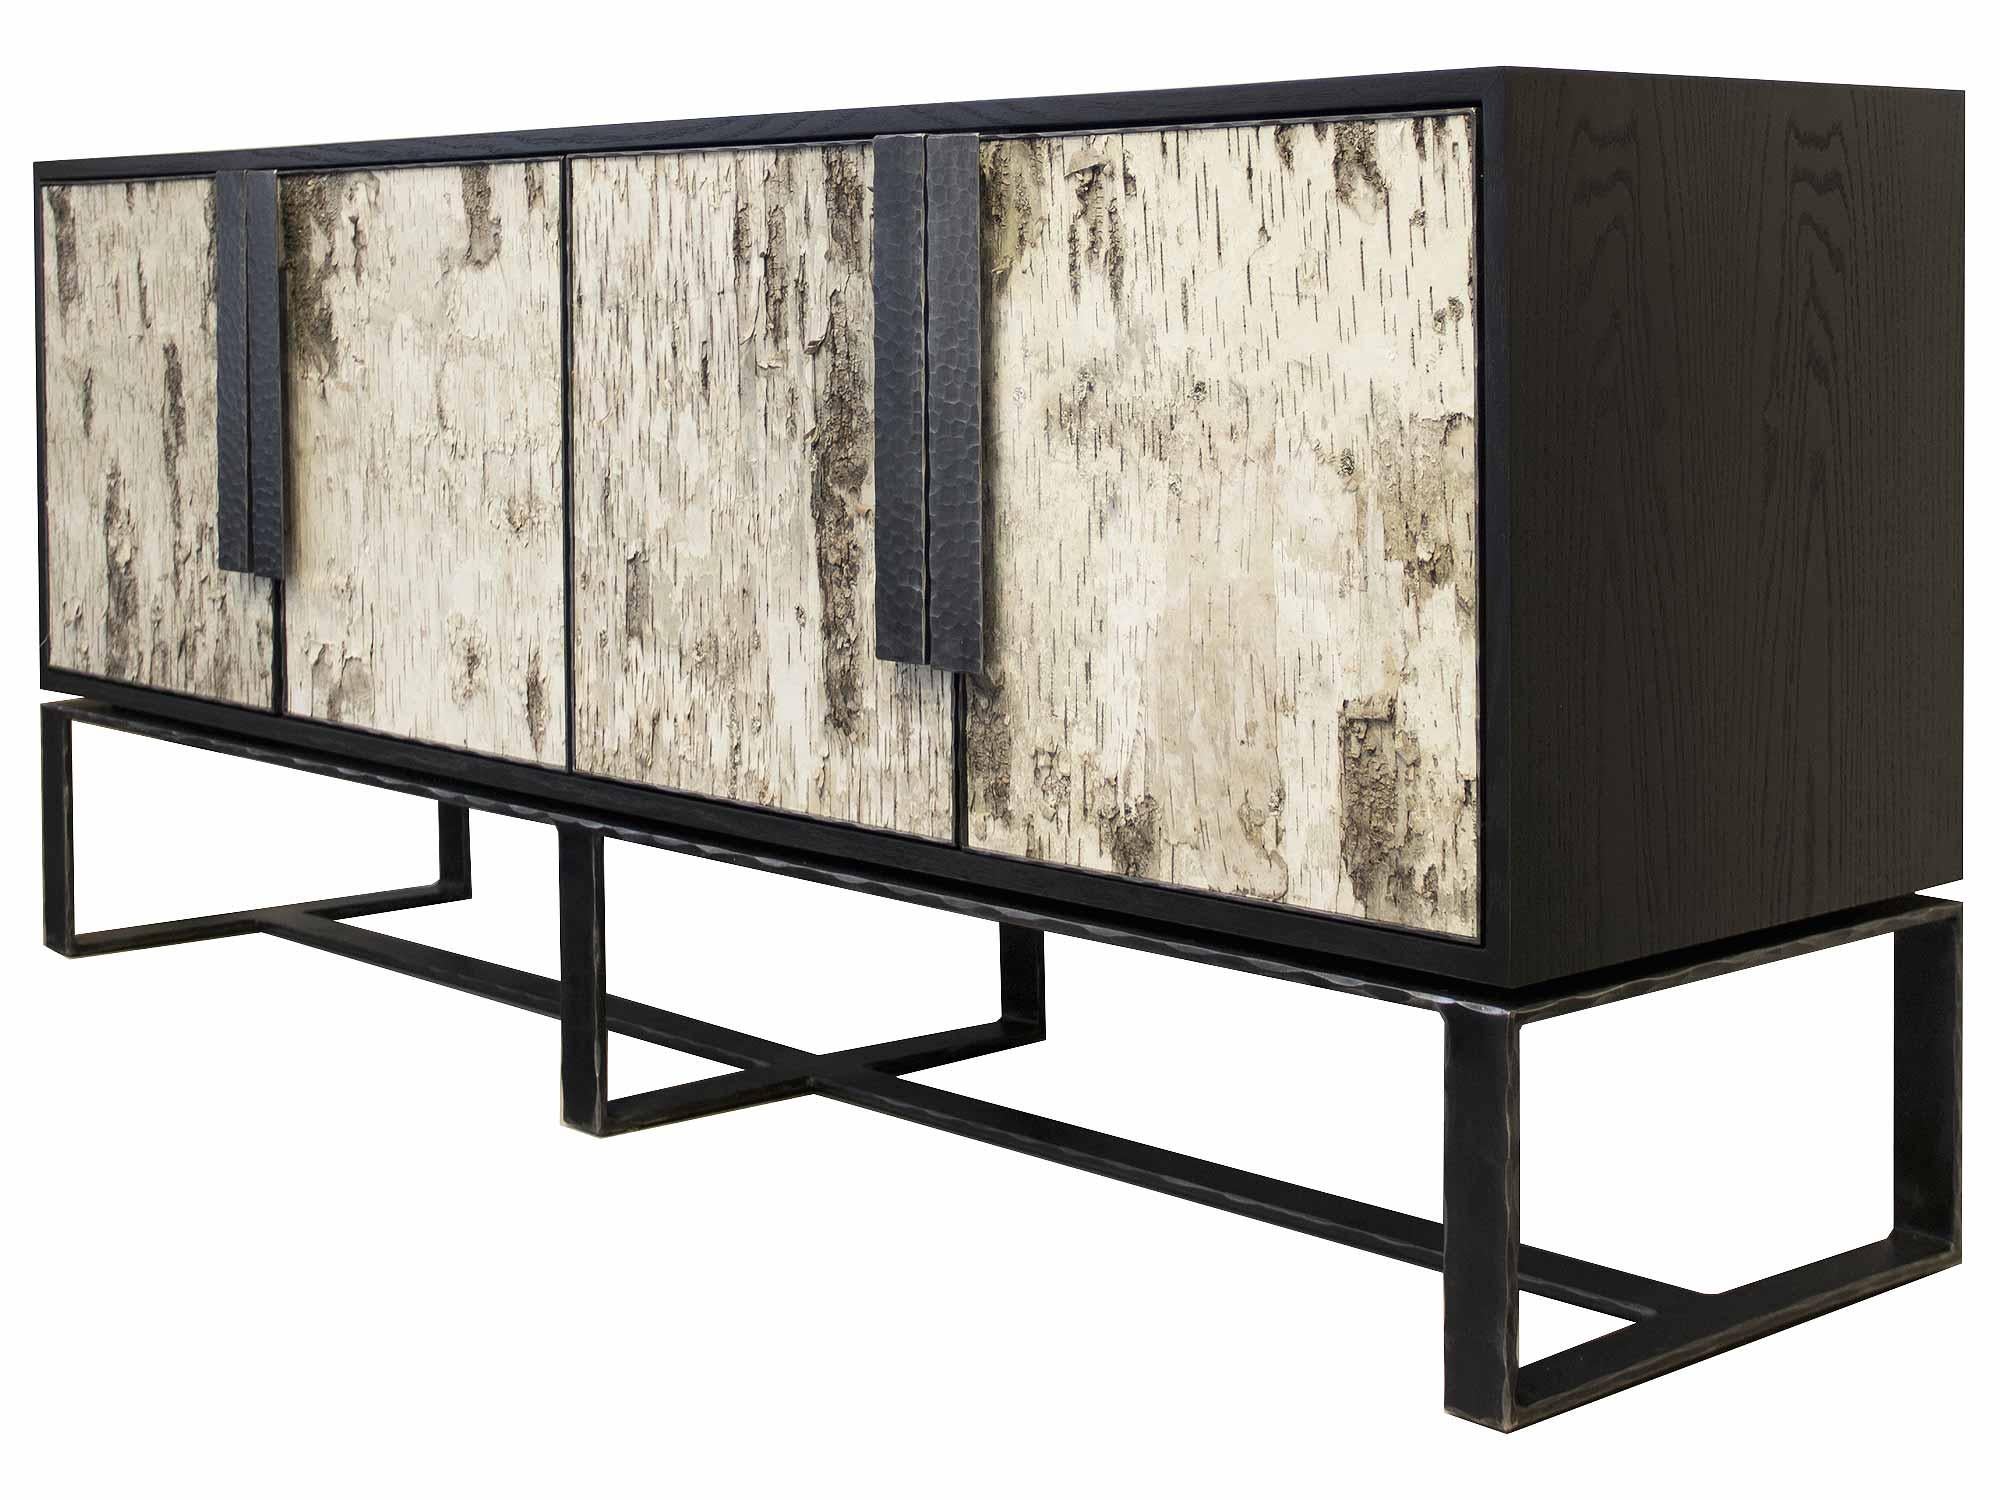 The birch buffet by Ercole Home has a 4-door front, with Espresso wood finish on oak.
Natural birch barks decorate the surface with hand-hammered metal framed doors, handles, and base in natural steel metal finish.
There is one adjustable interior